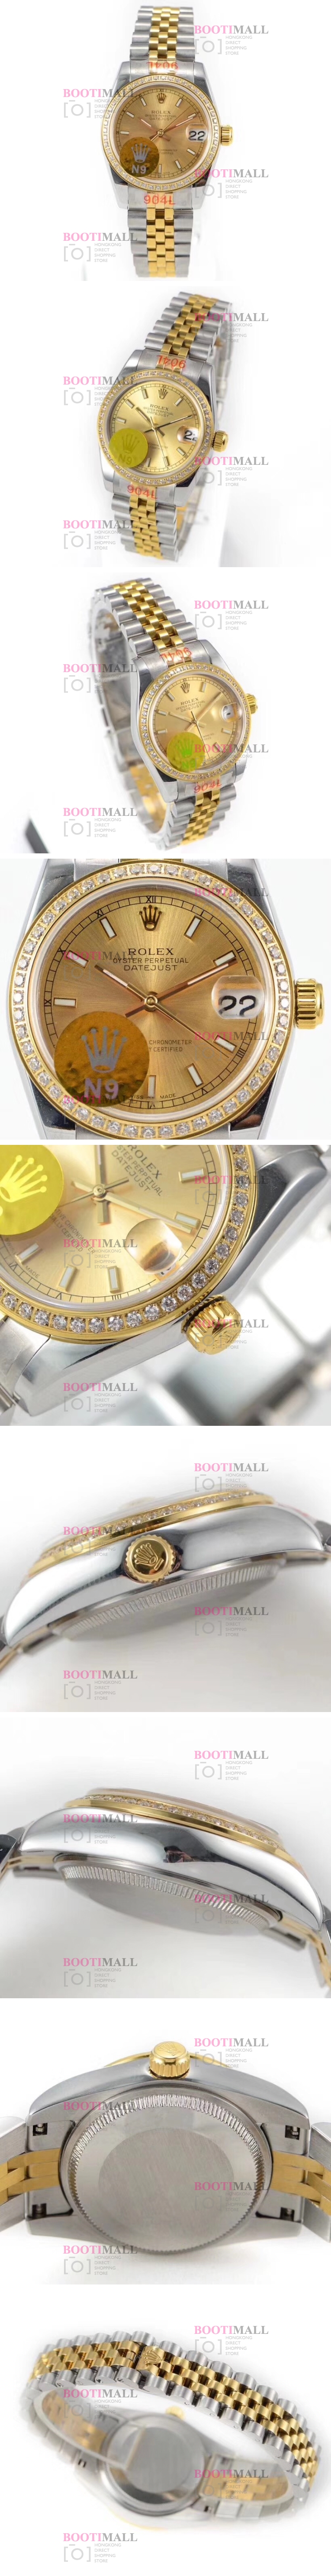 DATEJUST/GOLD η Oyster